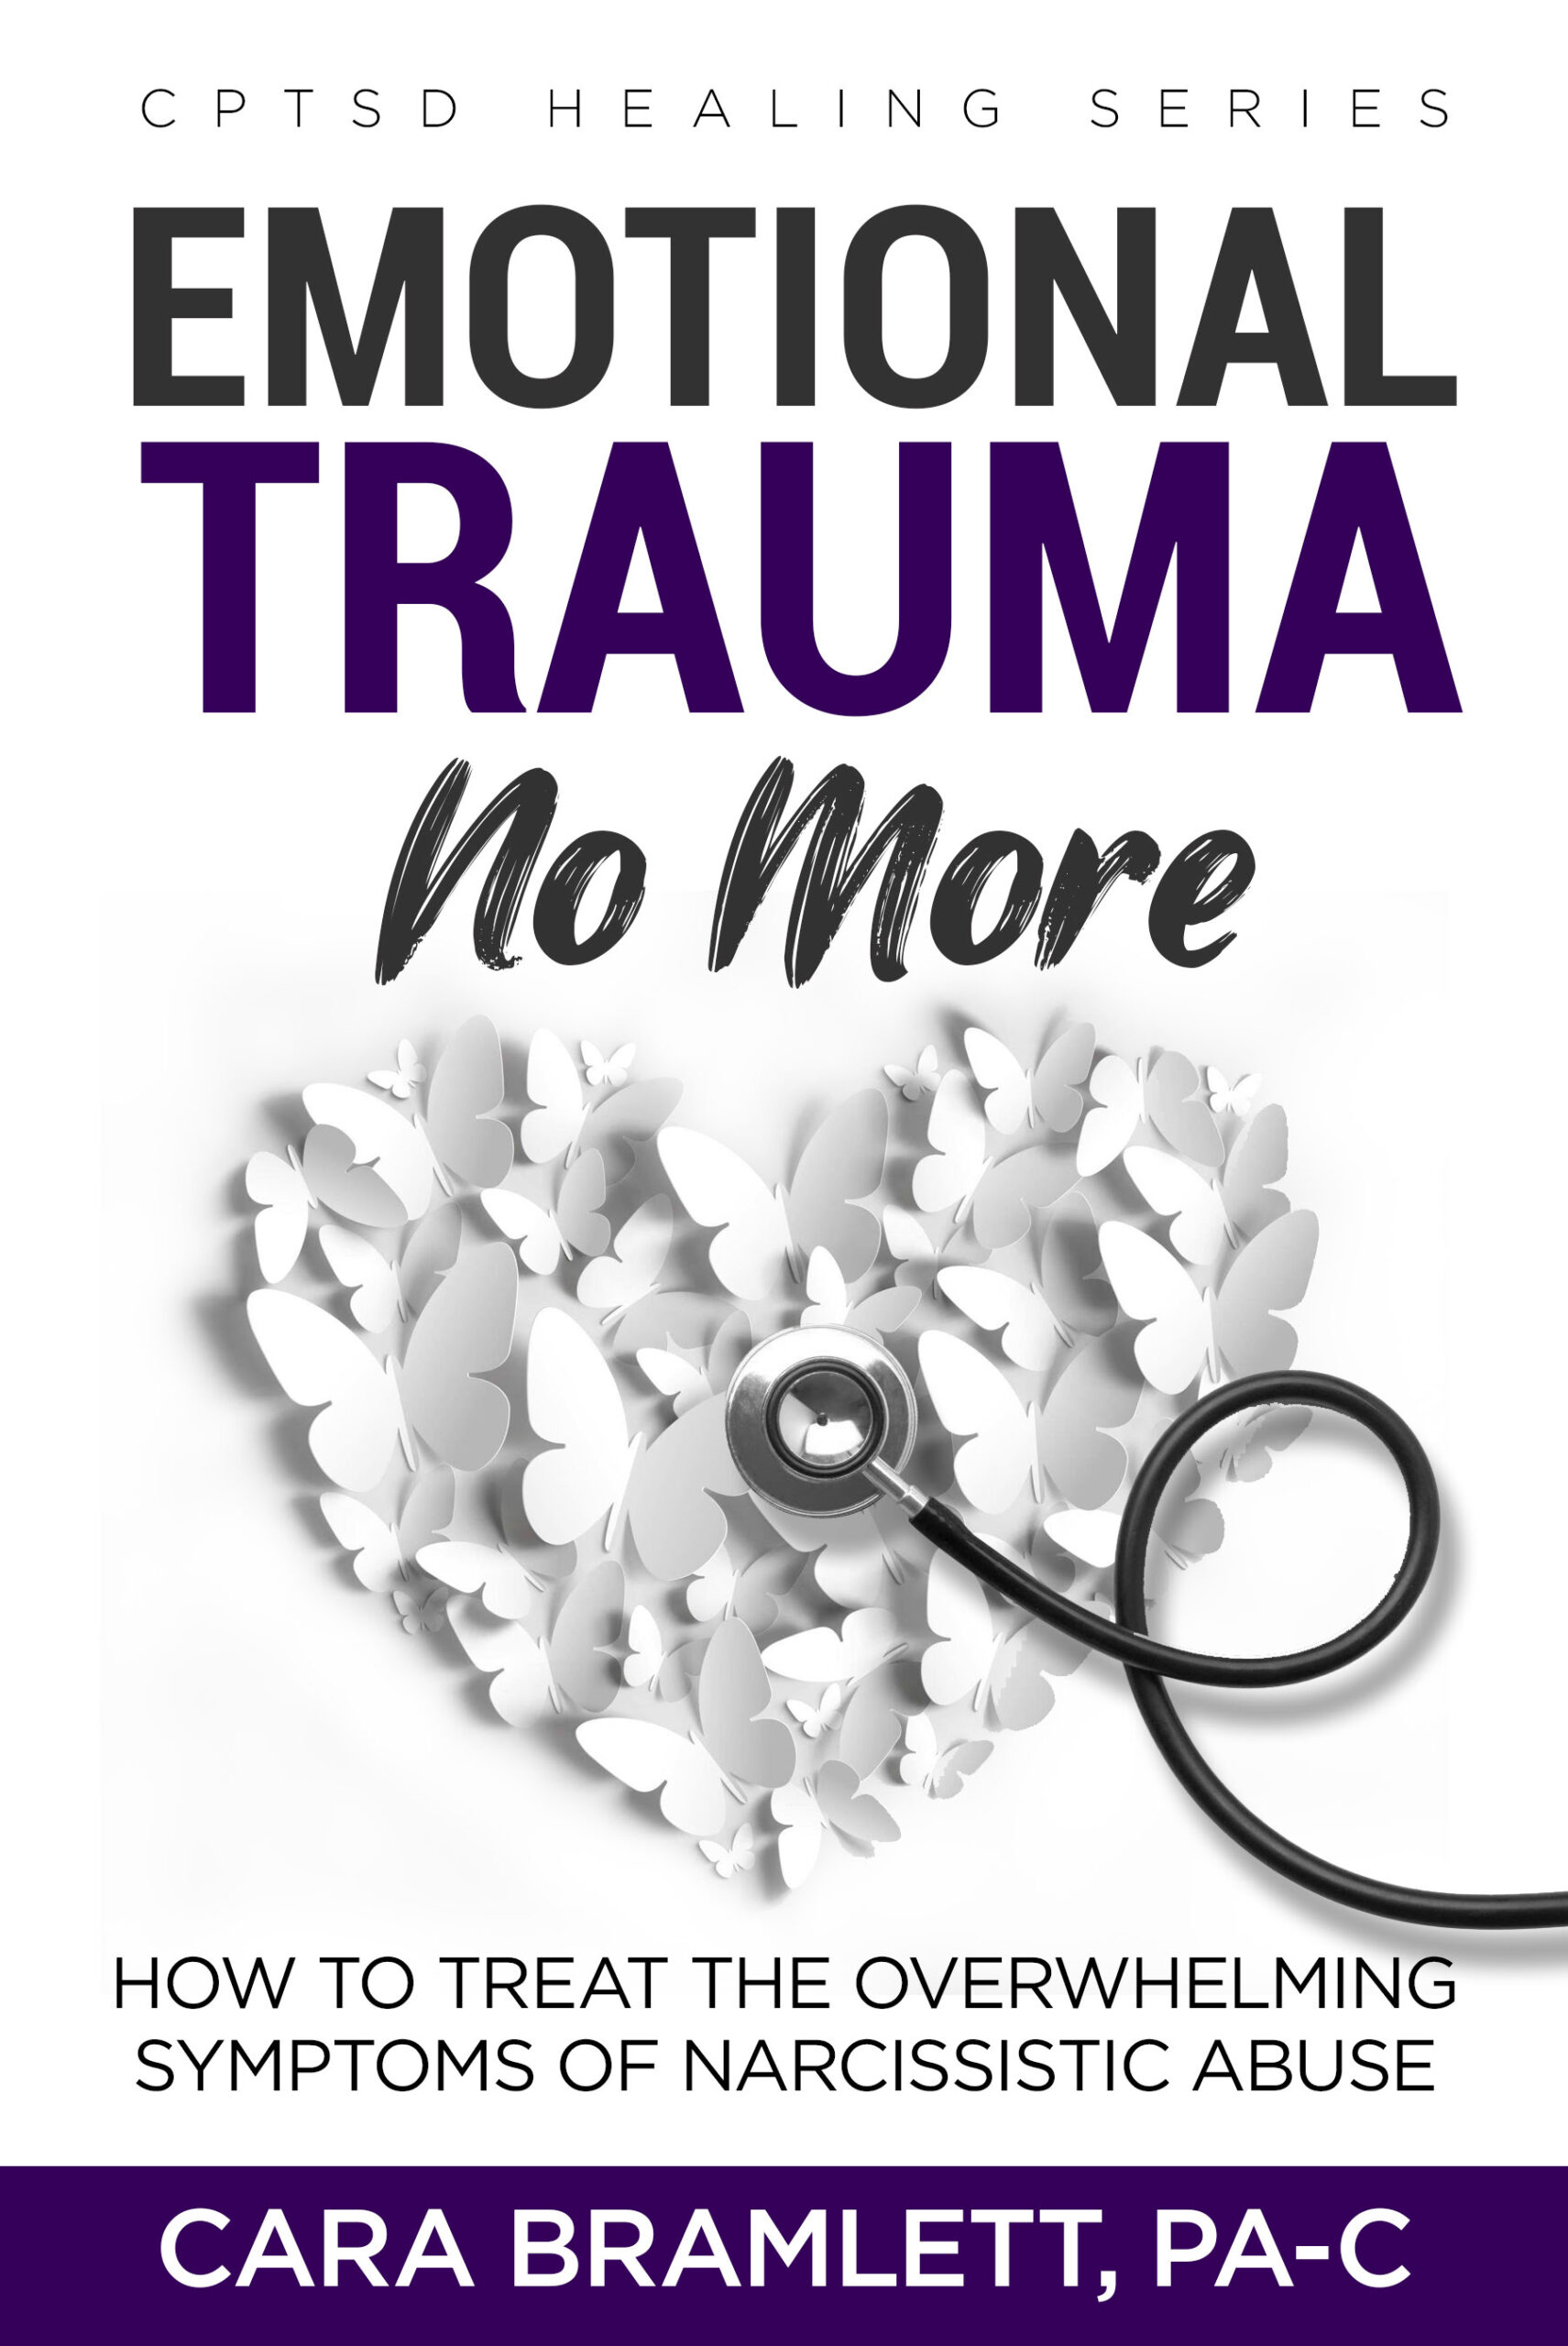 FREE: Emotional Trauma No More: How to Treat the Overwhelming Symptoms of Narcissistic Abuse by Cara Bramlett